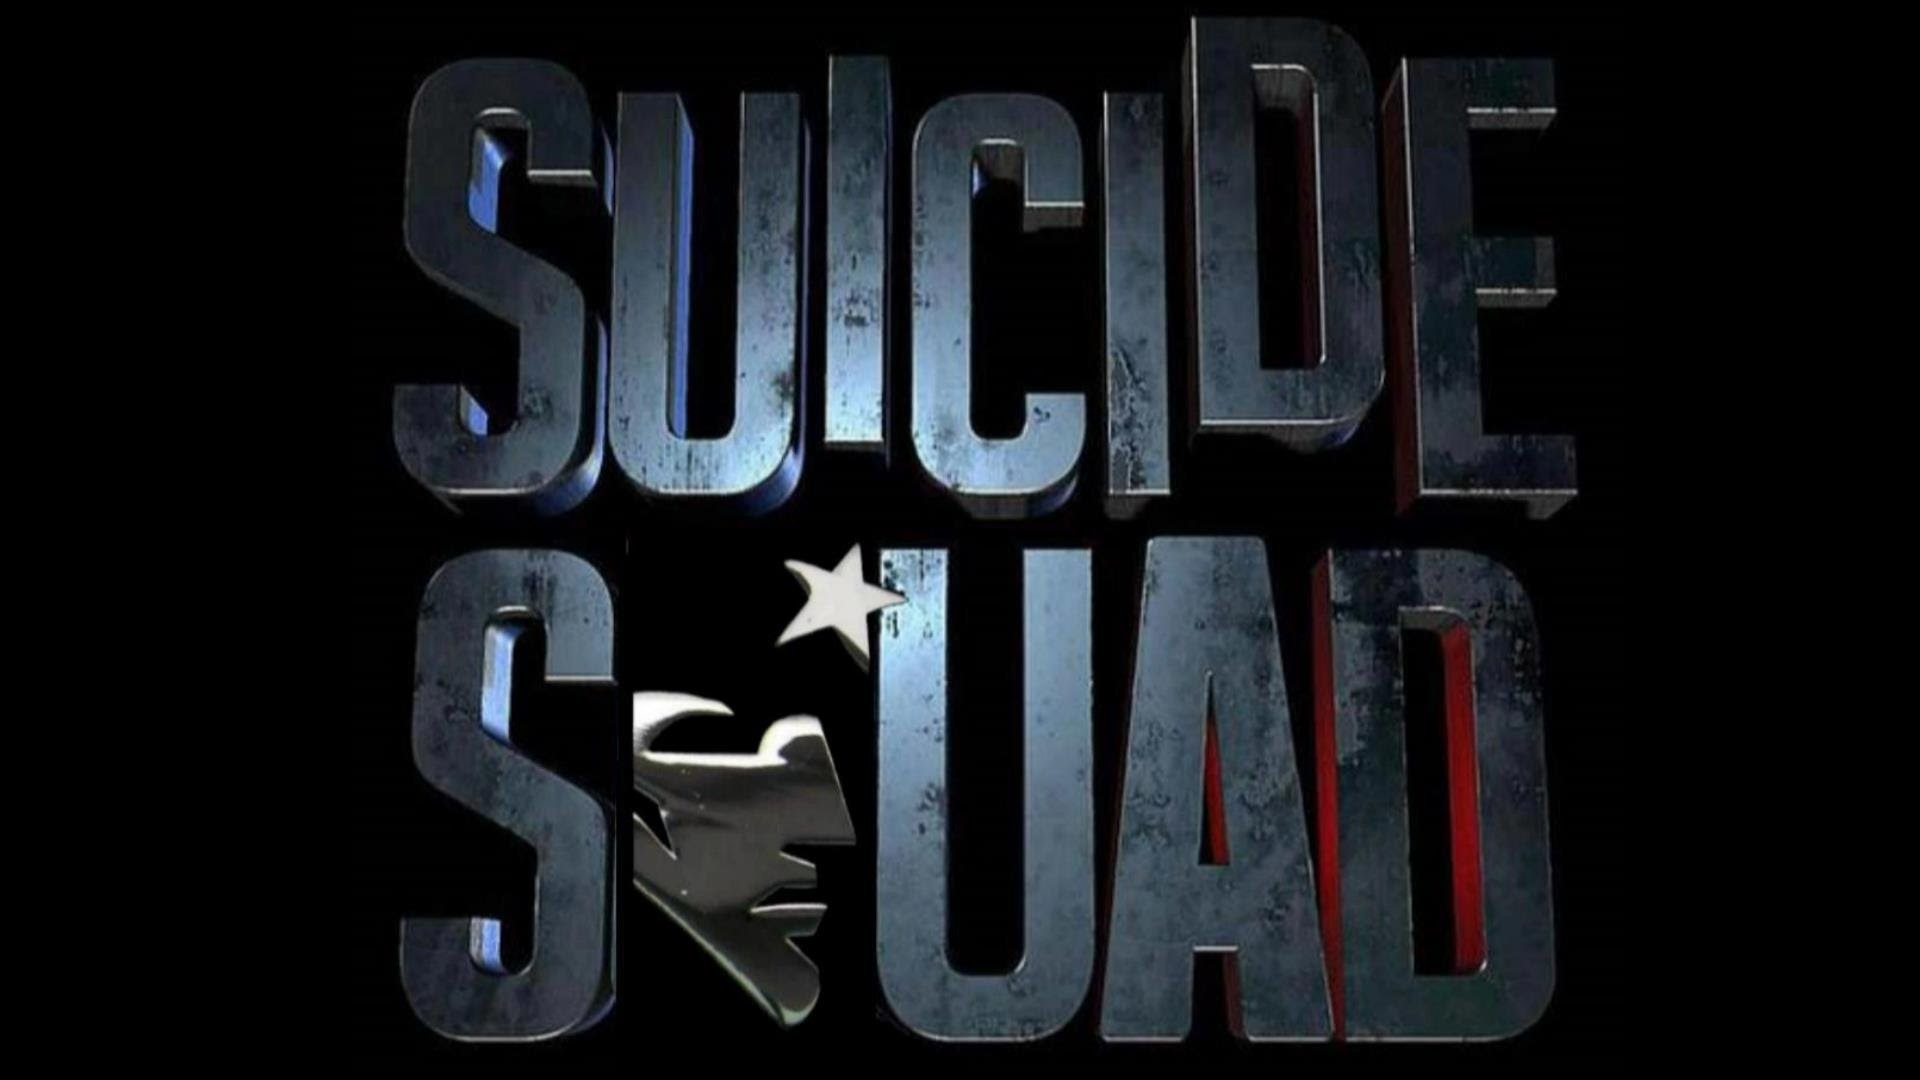 1920x1080 New England Patriots Suicide Squad - NFL Kickoff 2015 Trailer [HD] - YouTube